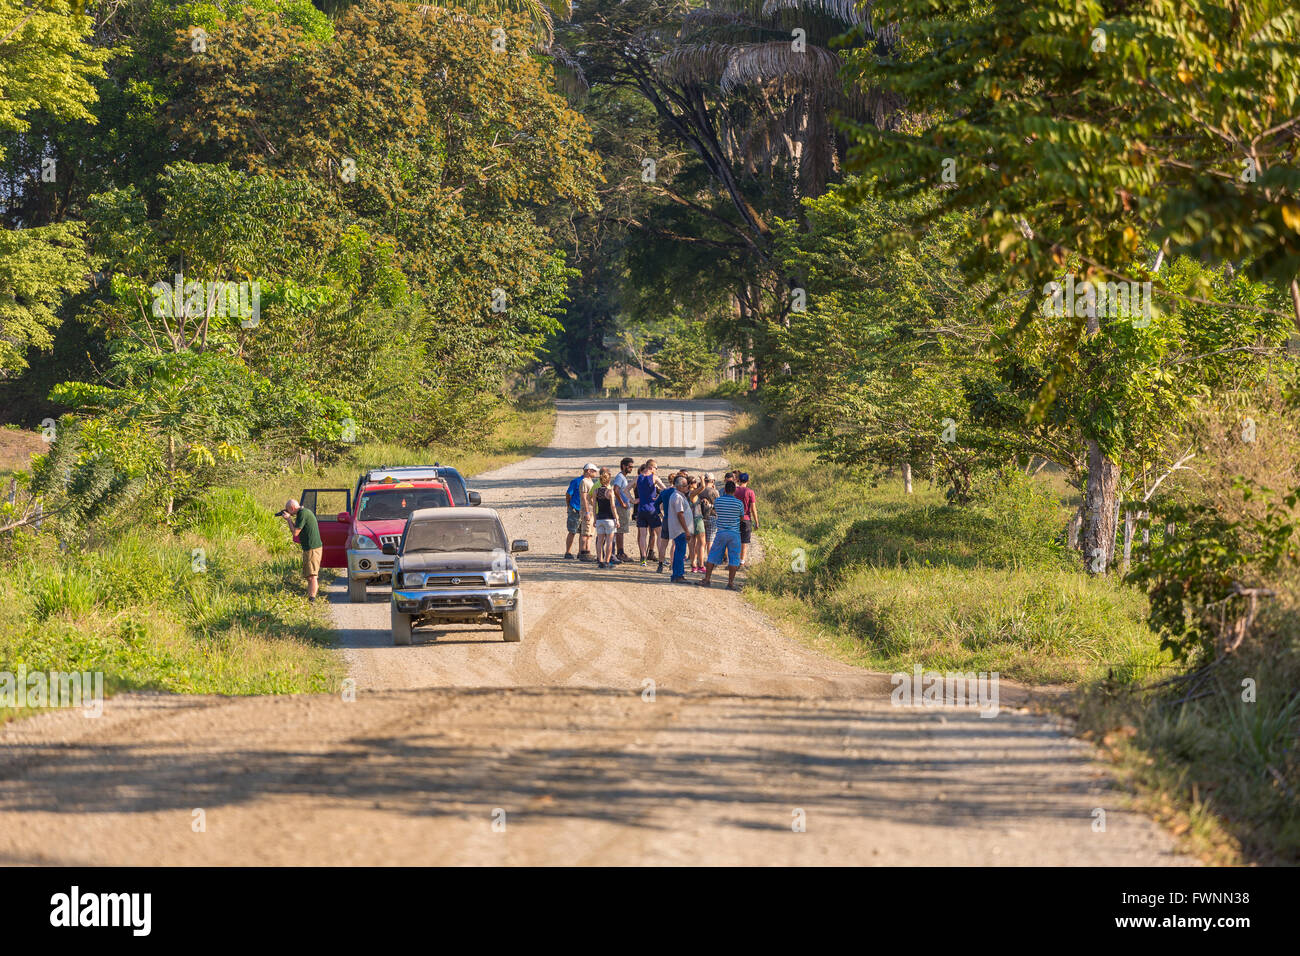 OSA PENINSULA, COSTA RICA - Eco-tourists stop cars on dirt road to view wildlife. Stock Photo